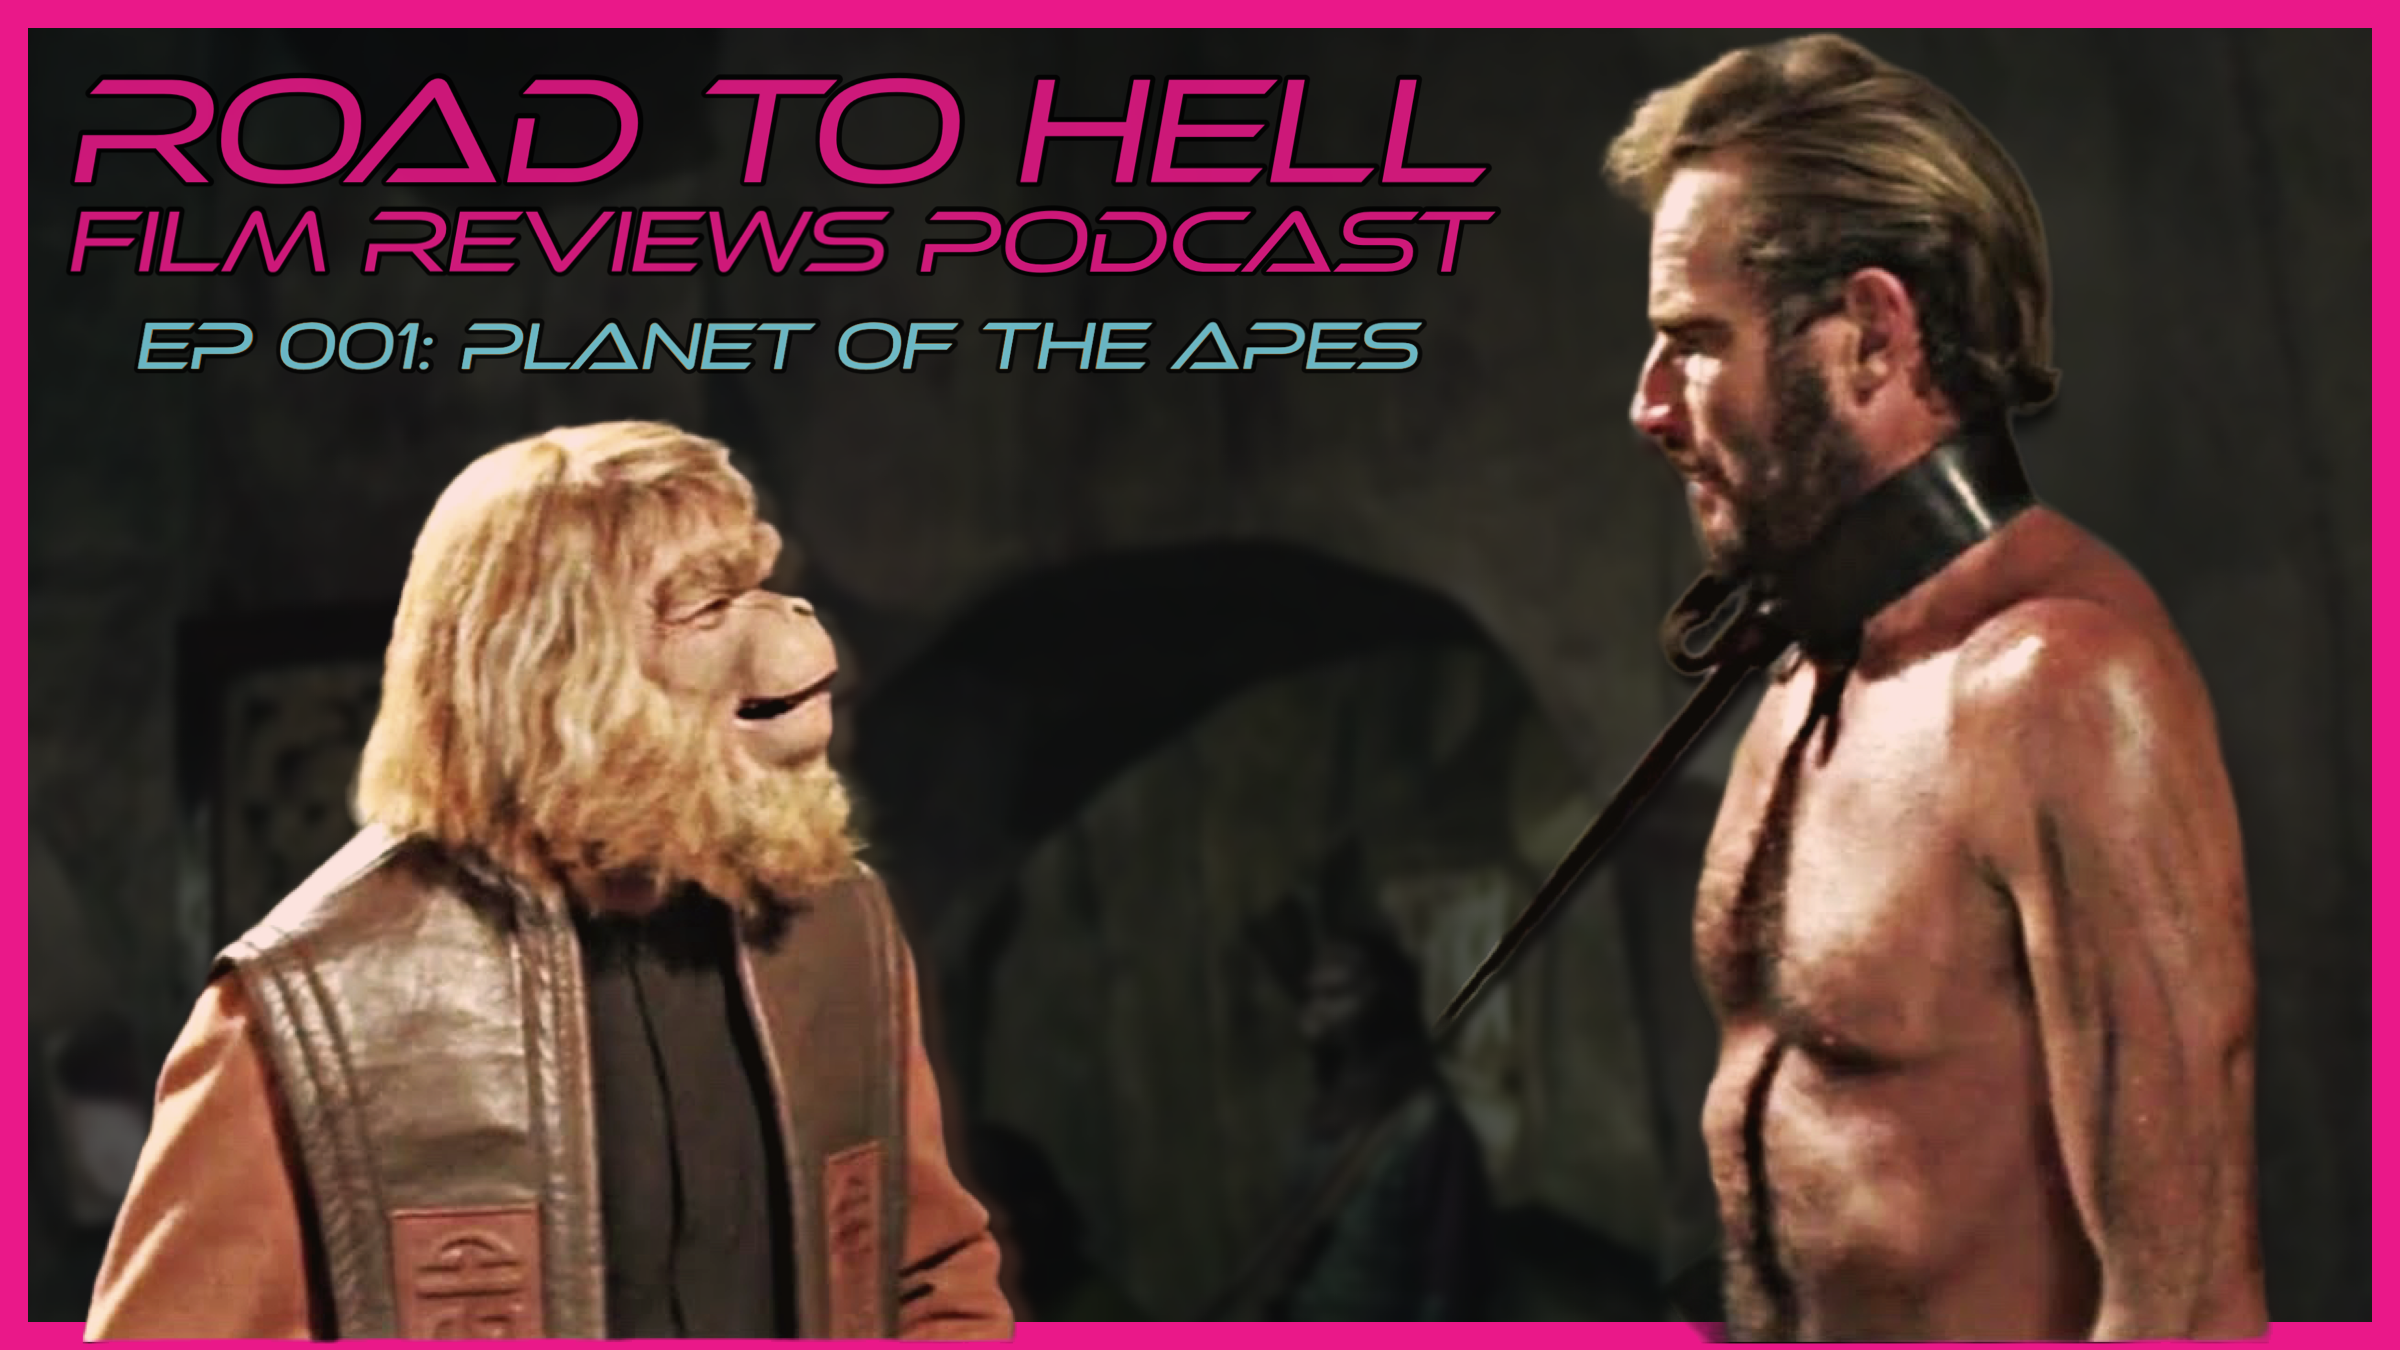 Planet Of The Apes Review: Road To Hell Film Reviews Episode 001